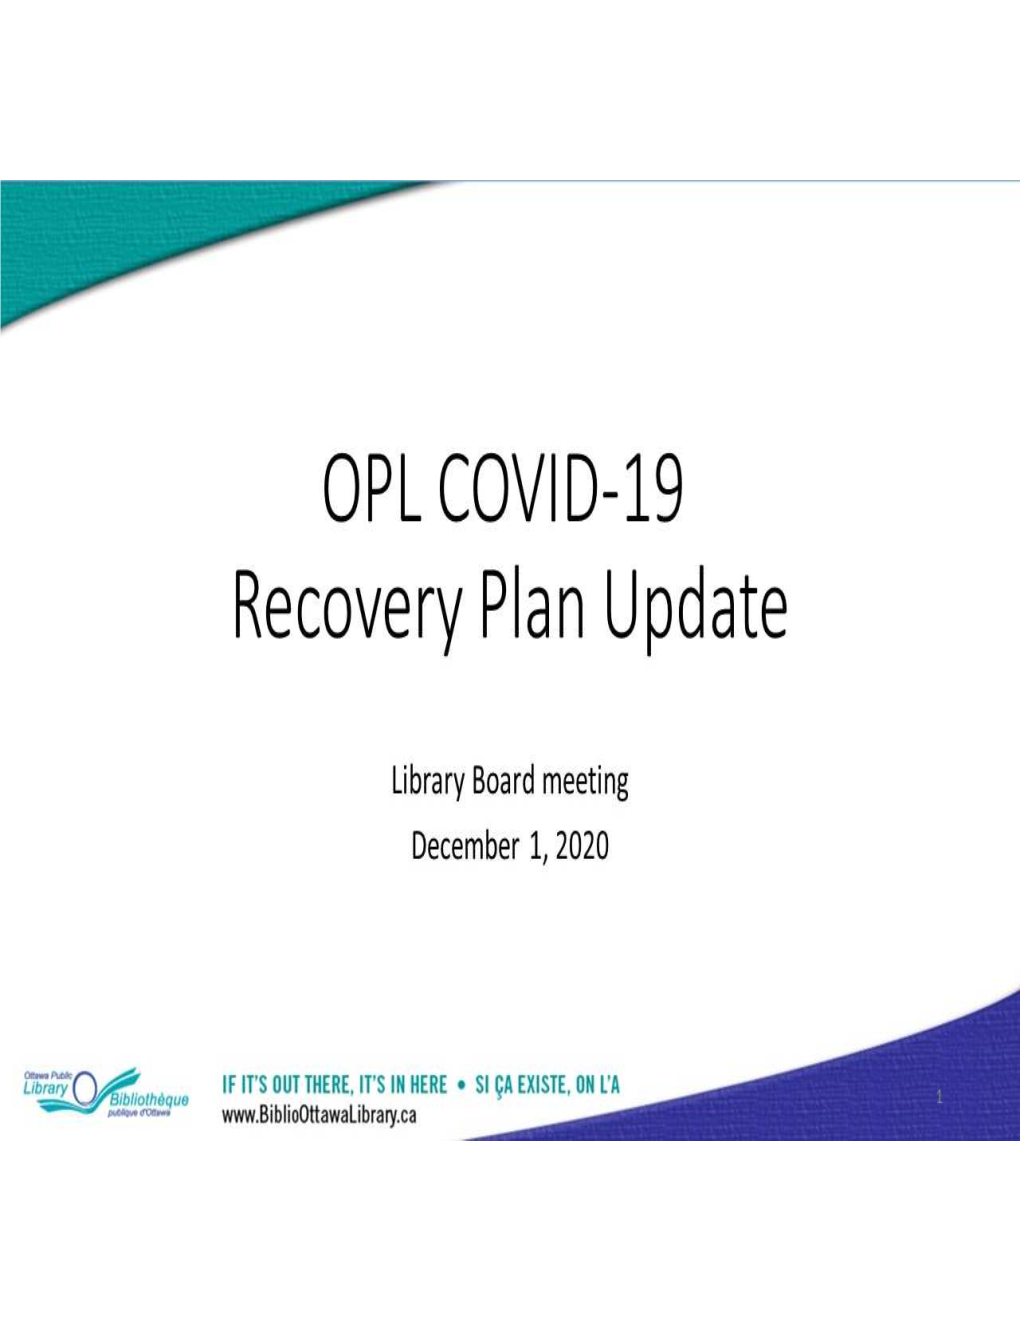 OPL COVID-19 Recovery Plan Update